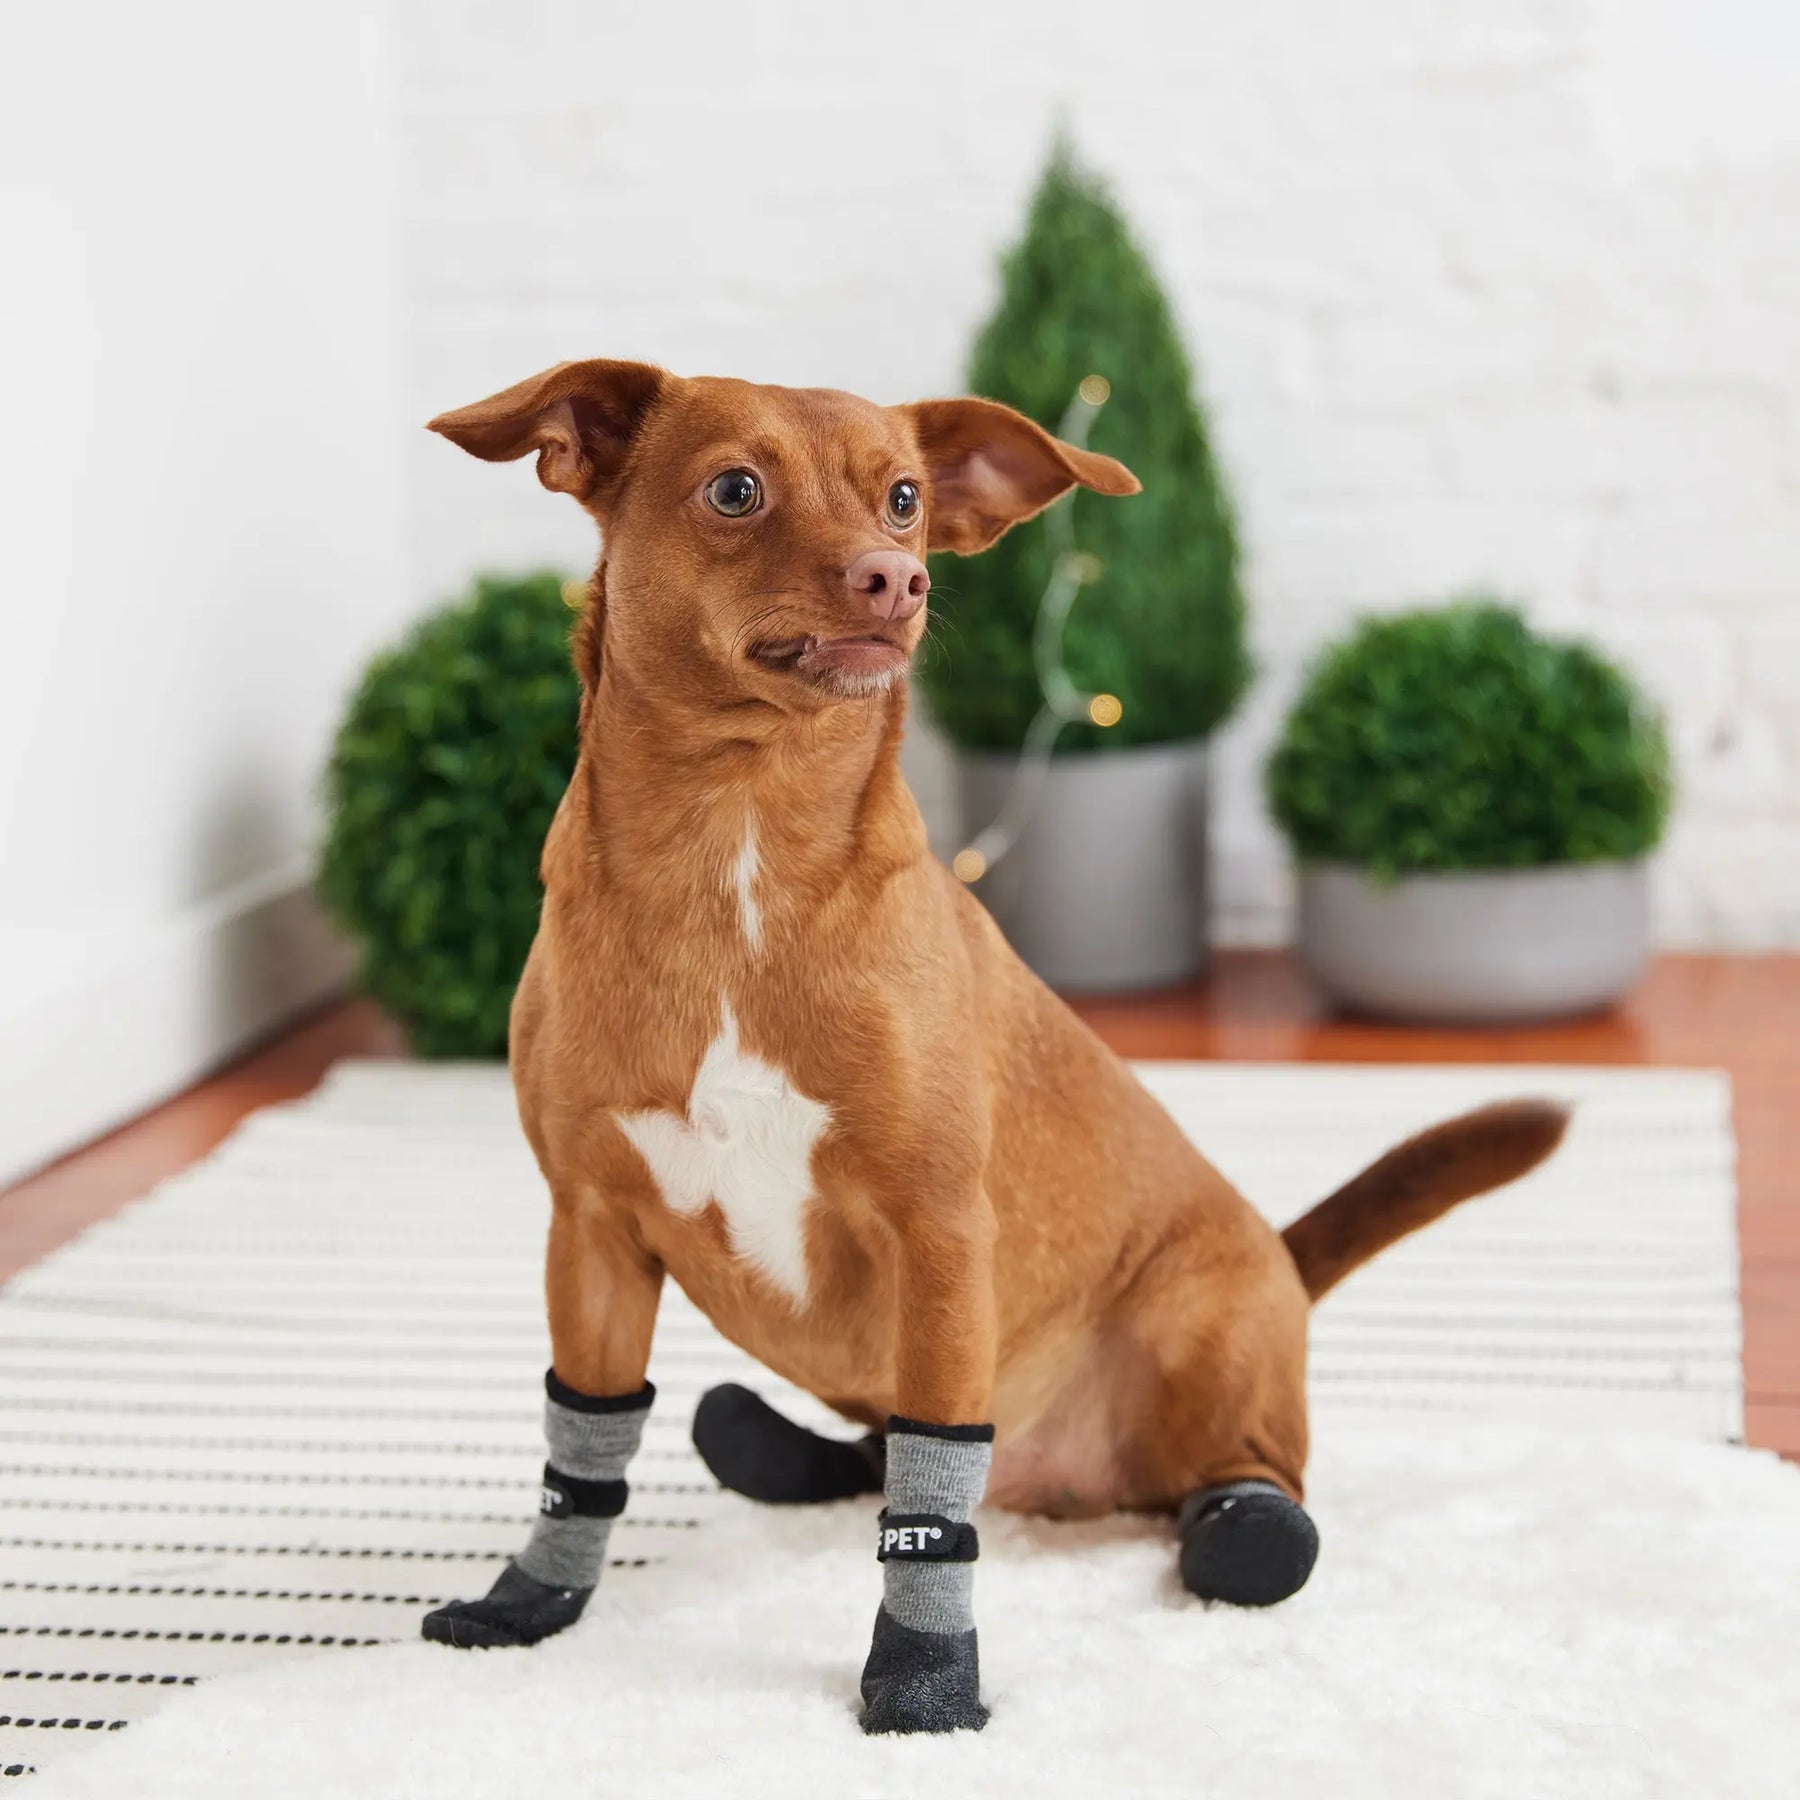 Best Dog Paw Protection in Winter or How to Protect Your Dog's Feet in 4  Easy Steps - Dog Trotting